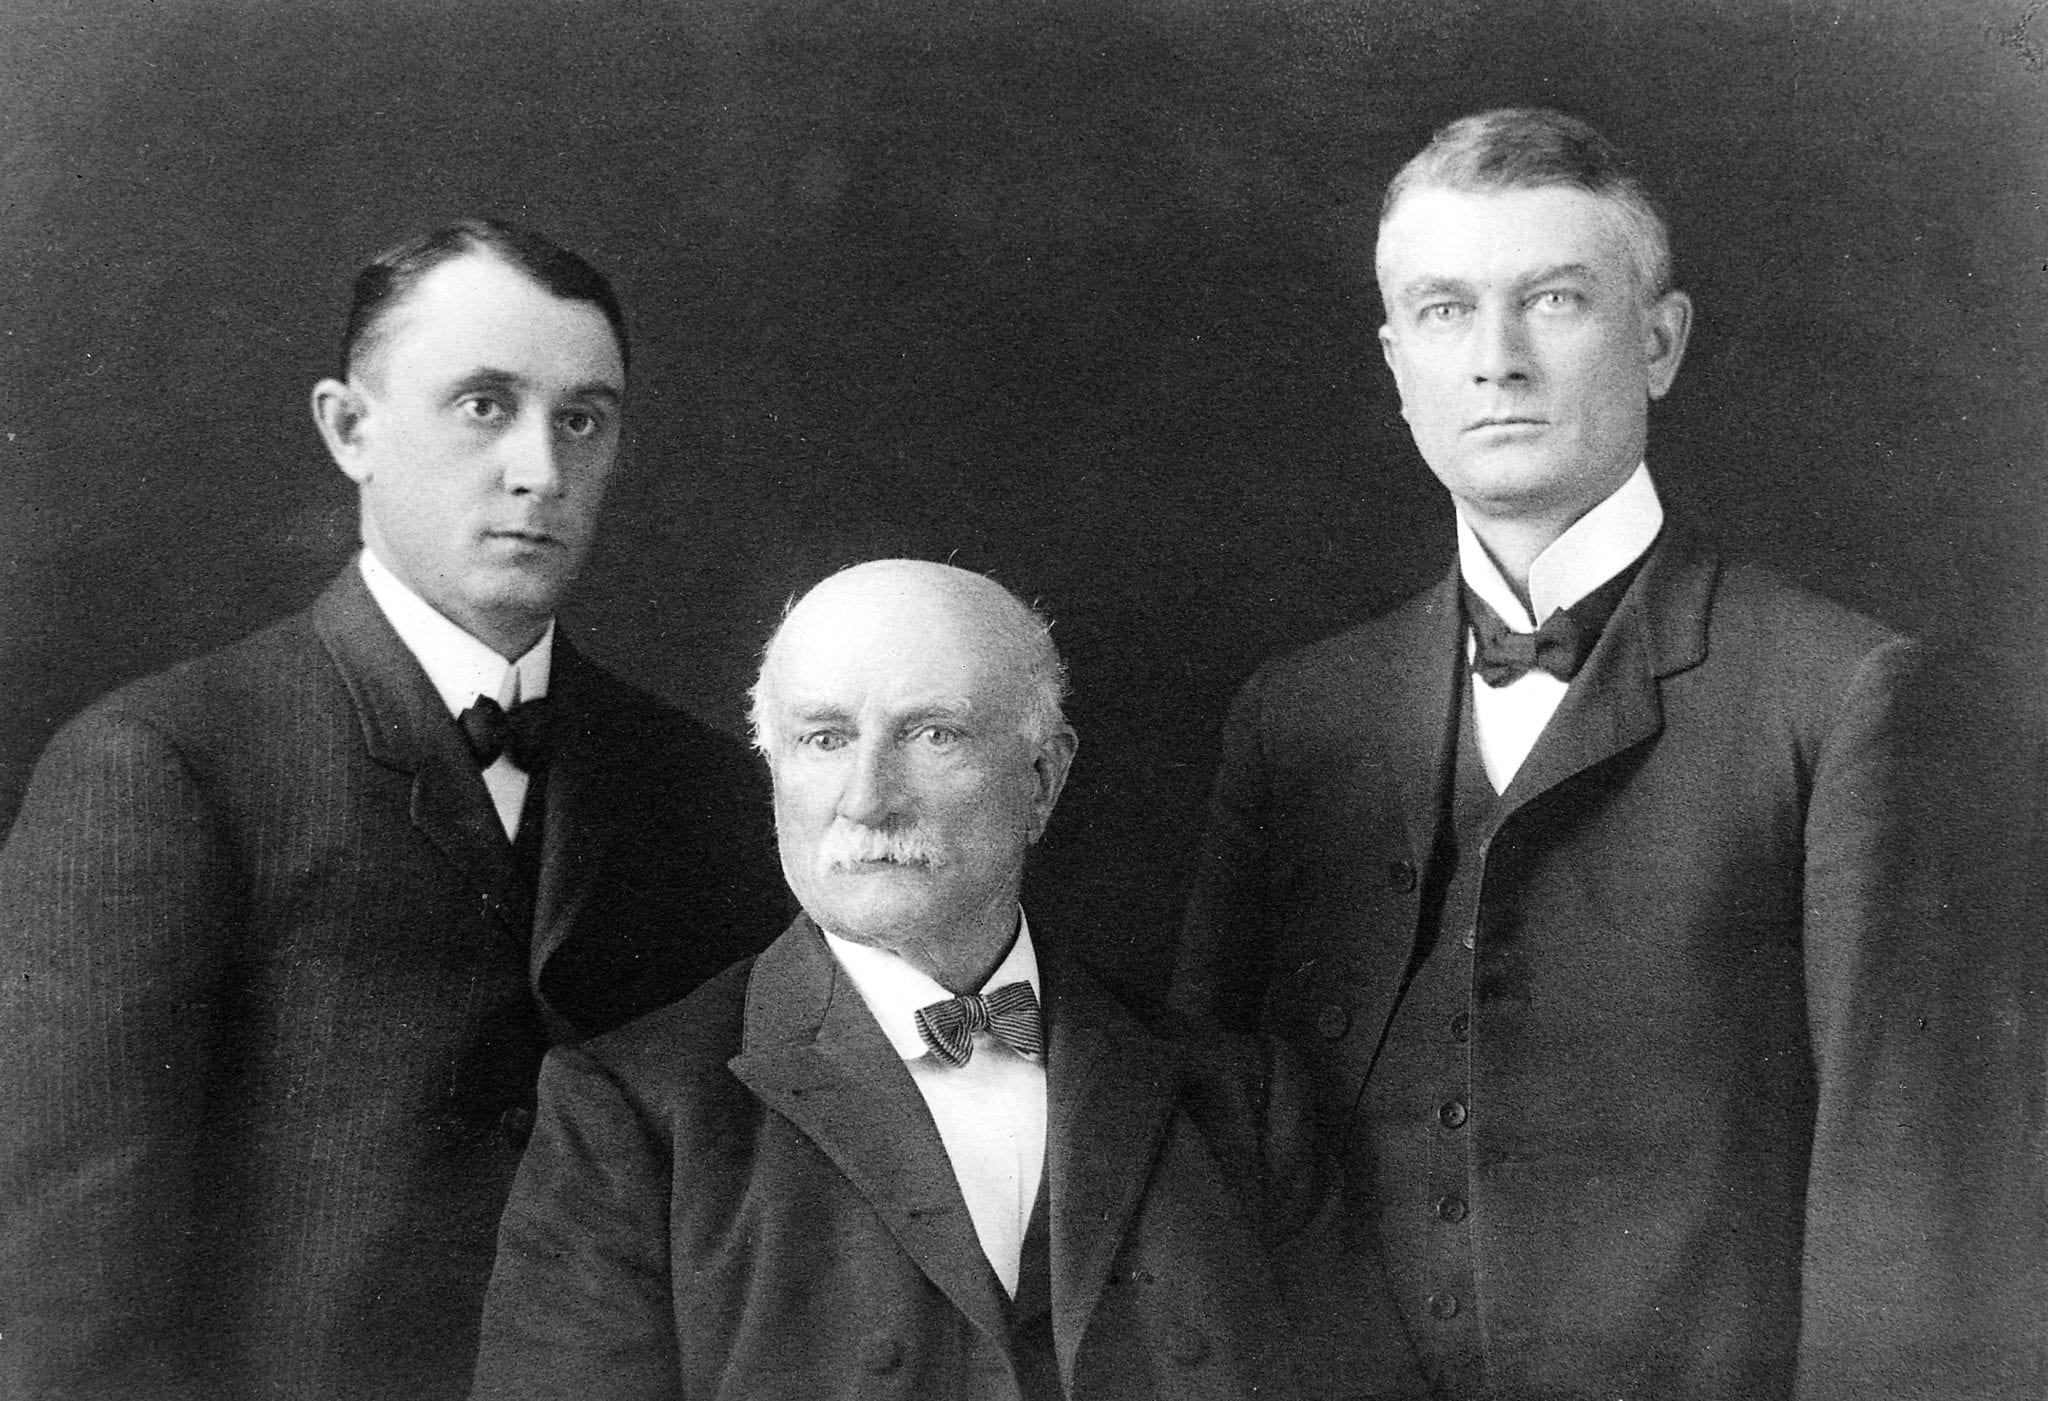 Portrait of William Worrell Mayo and his sons: Charles Mayo (right) and William James Mayo (left)